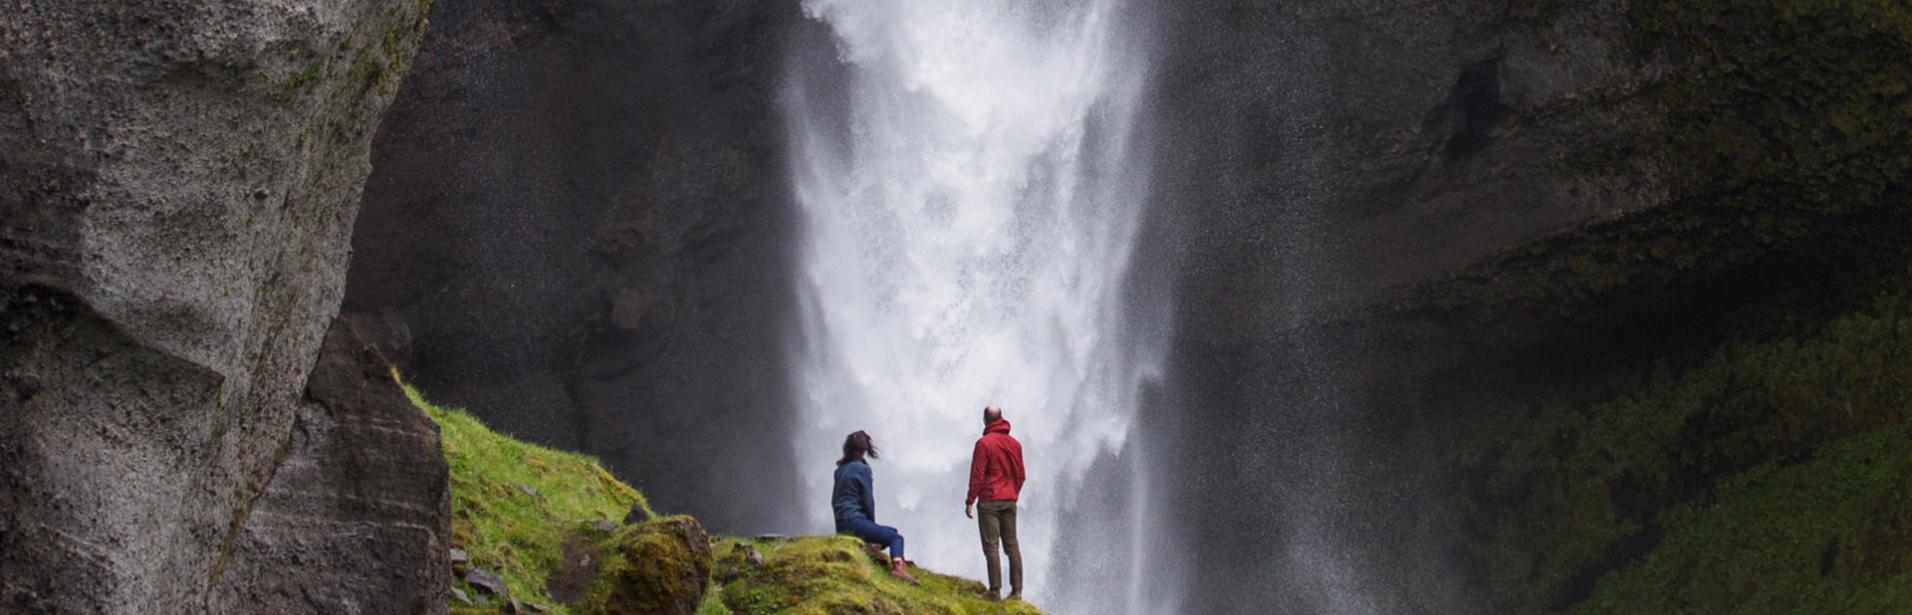 A couple exploring a waterfall in southern Iceland.